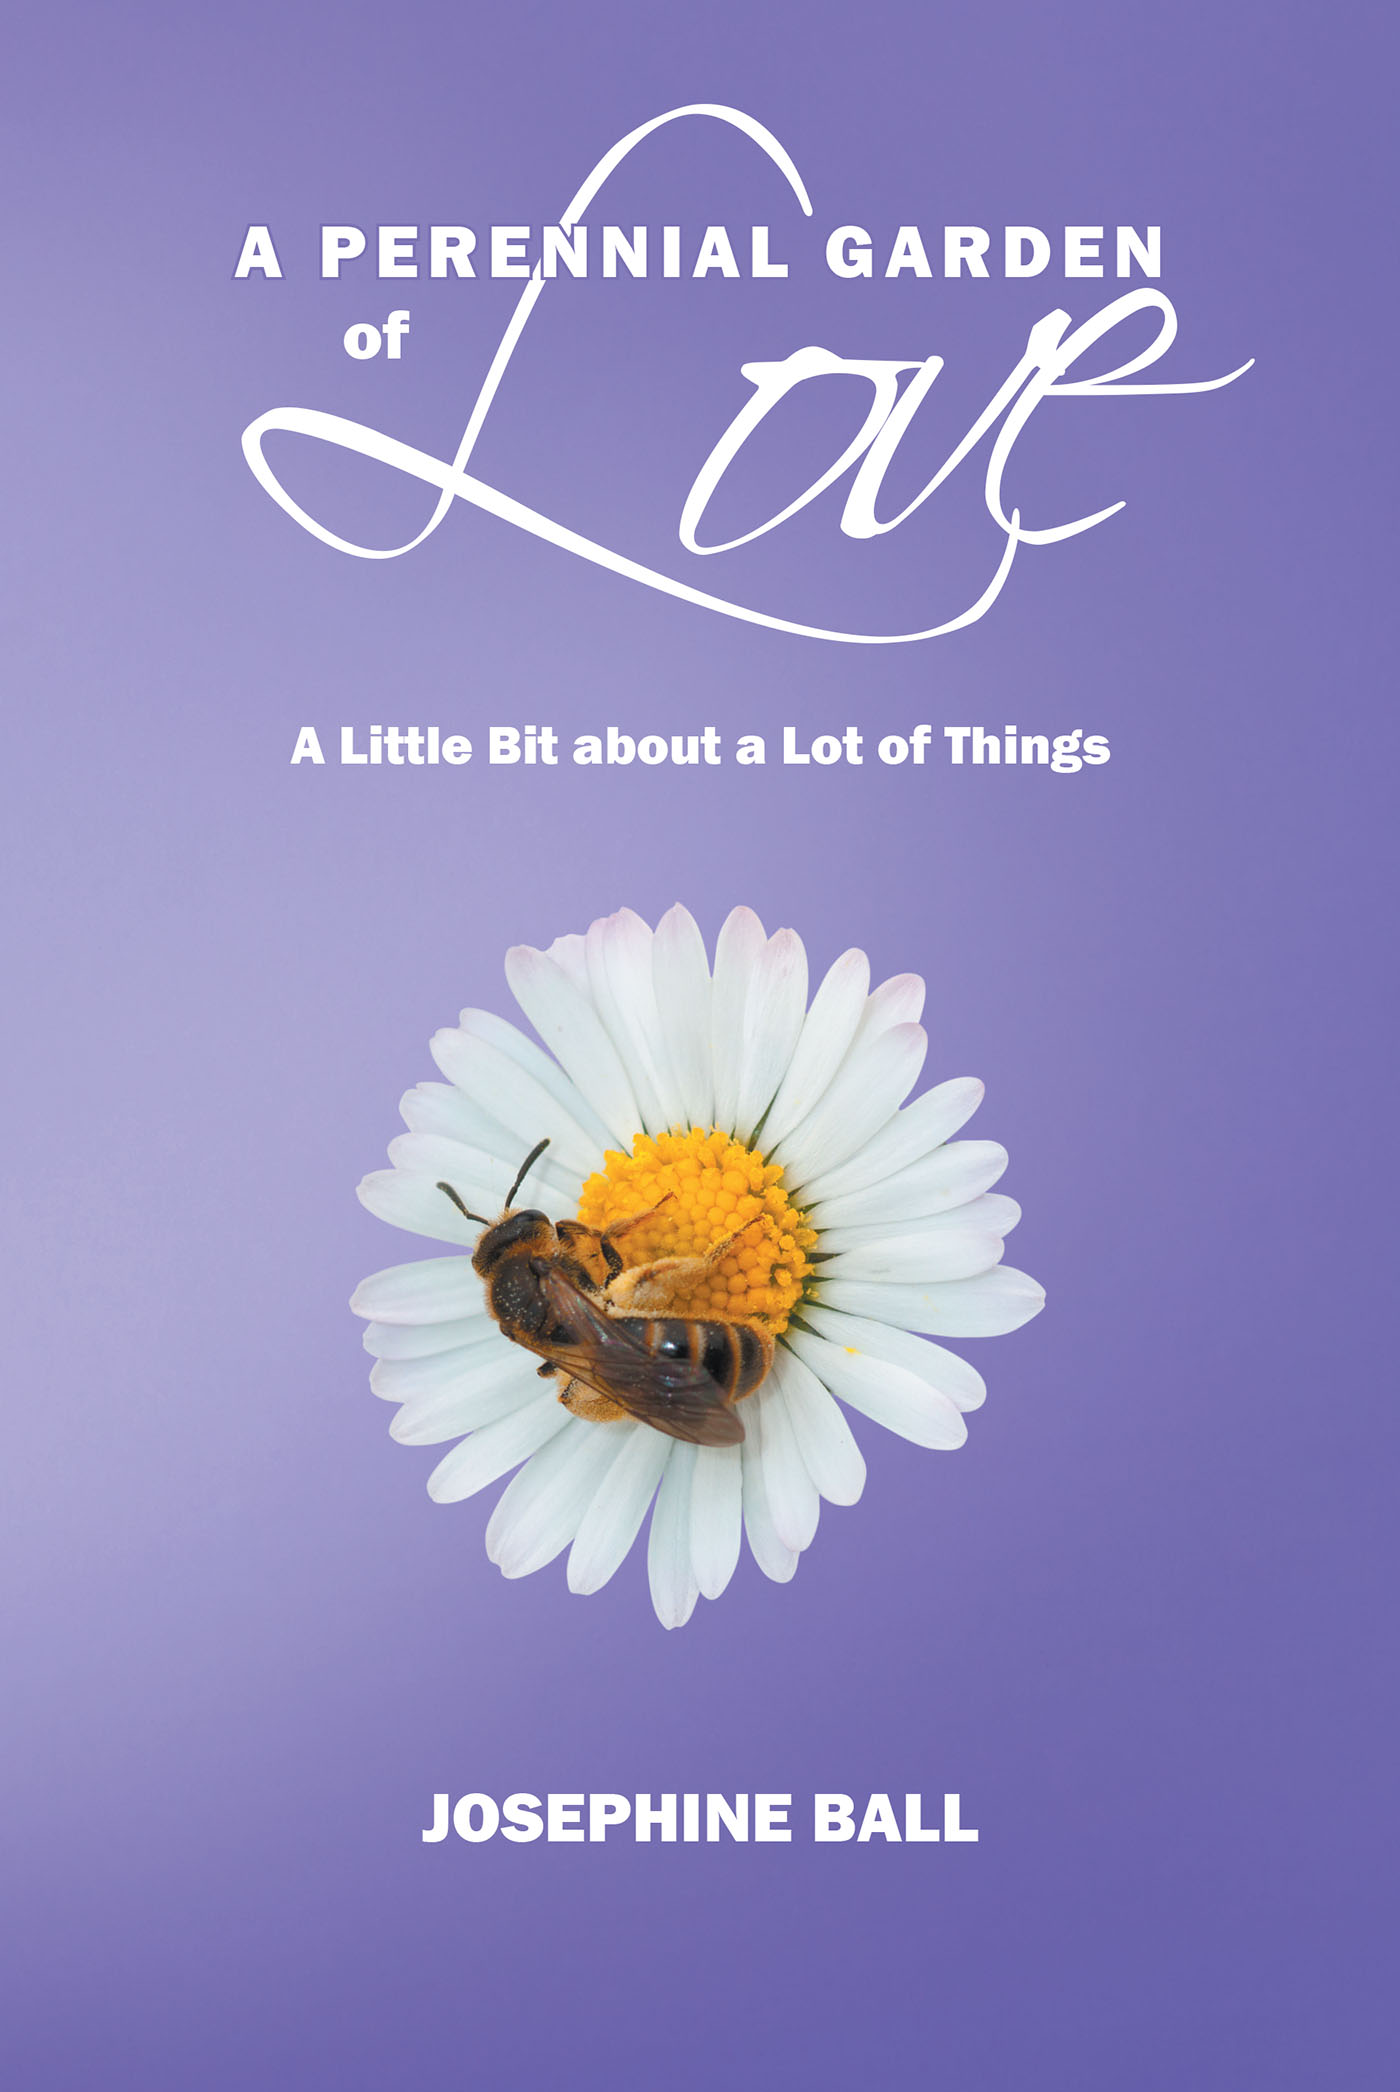 Author Josephine Ball’s New Book, “A Perennial Garden of Love: A Little Bit about a Lot of Things” is a Poignant Collection of Moments & Wisdom from the Author's Life